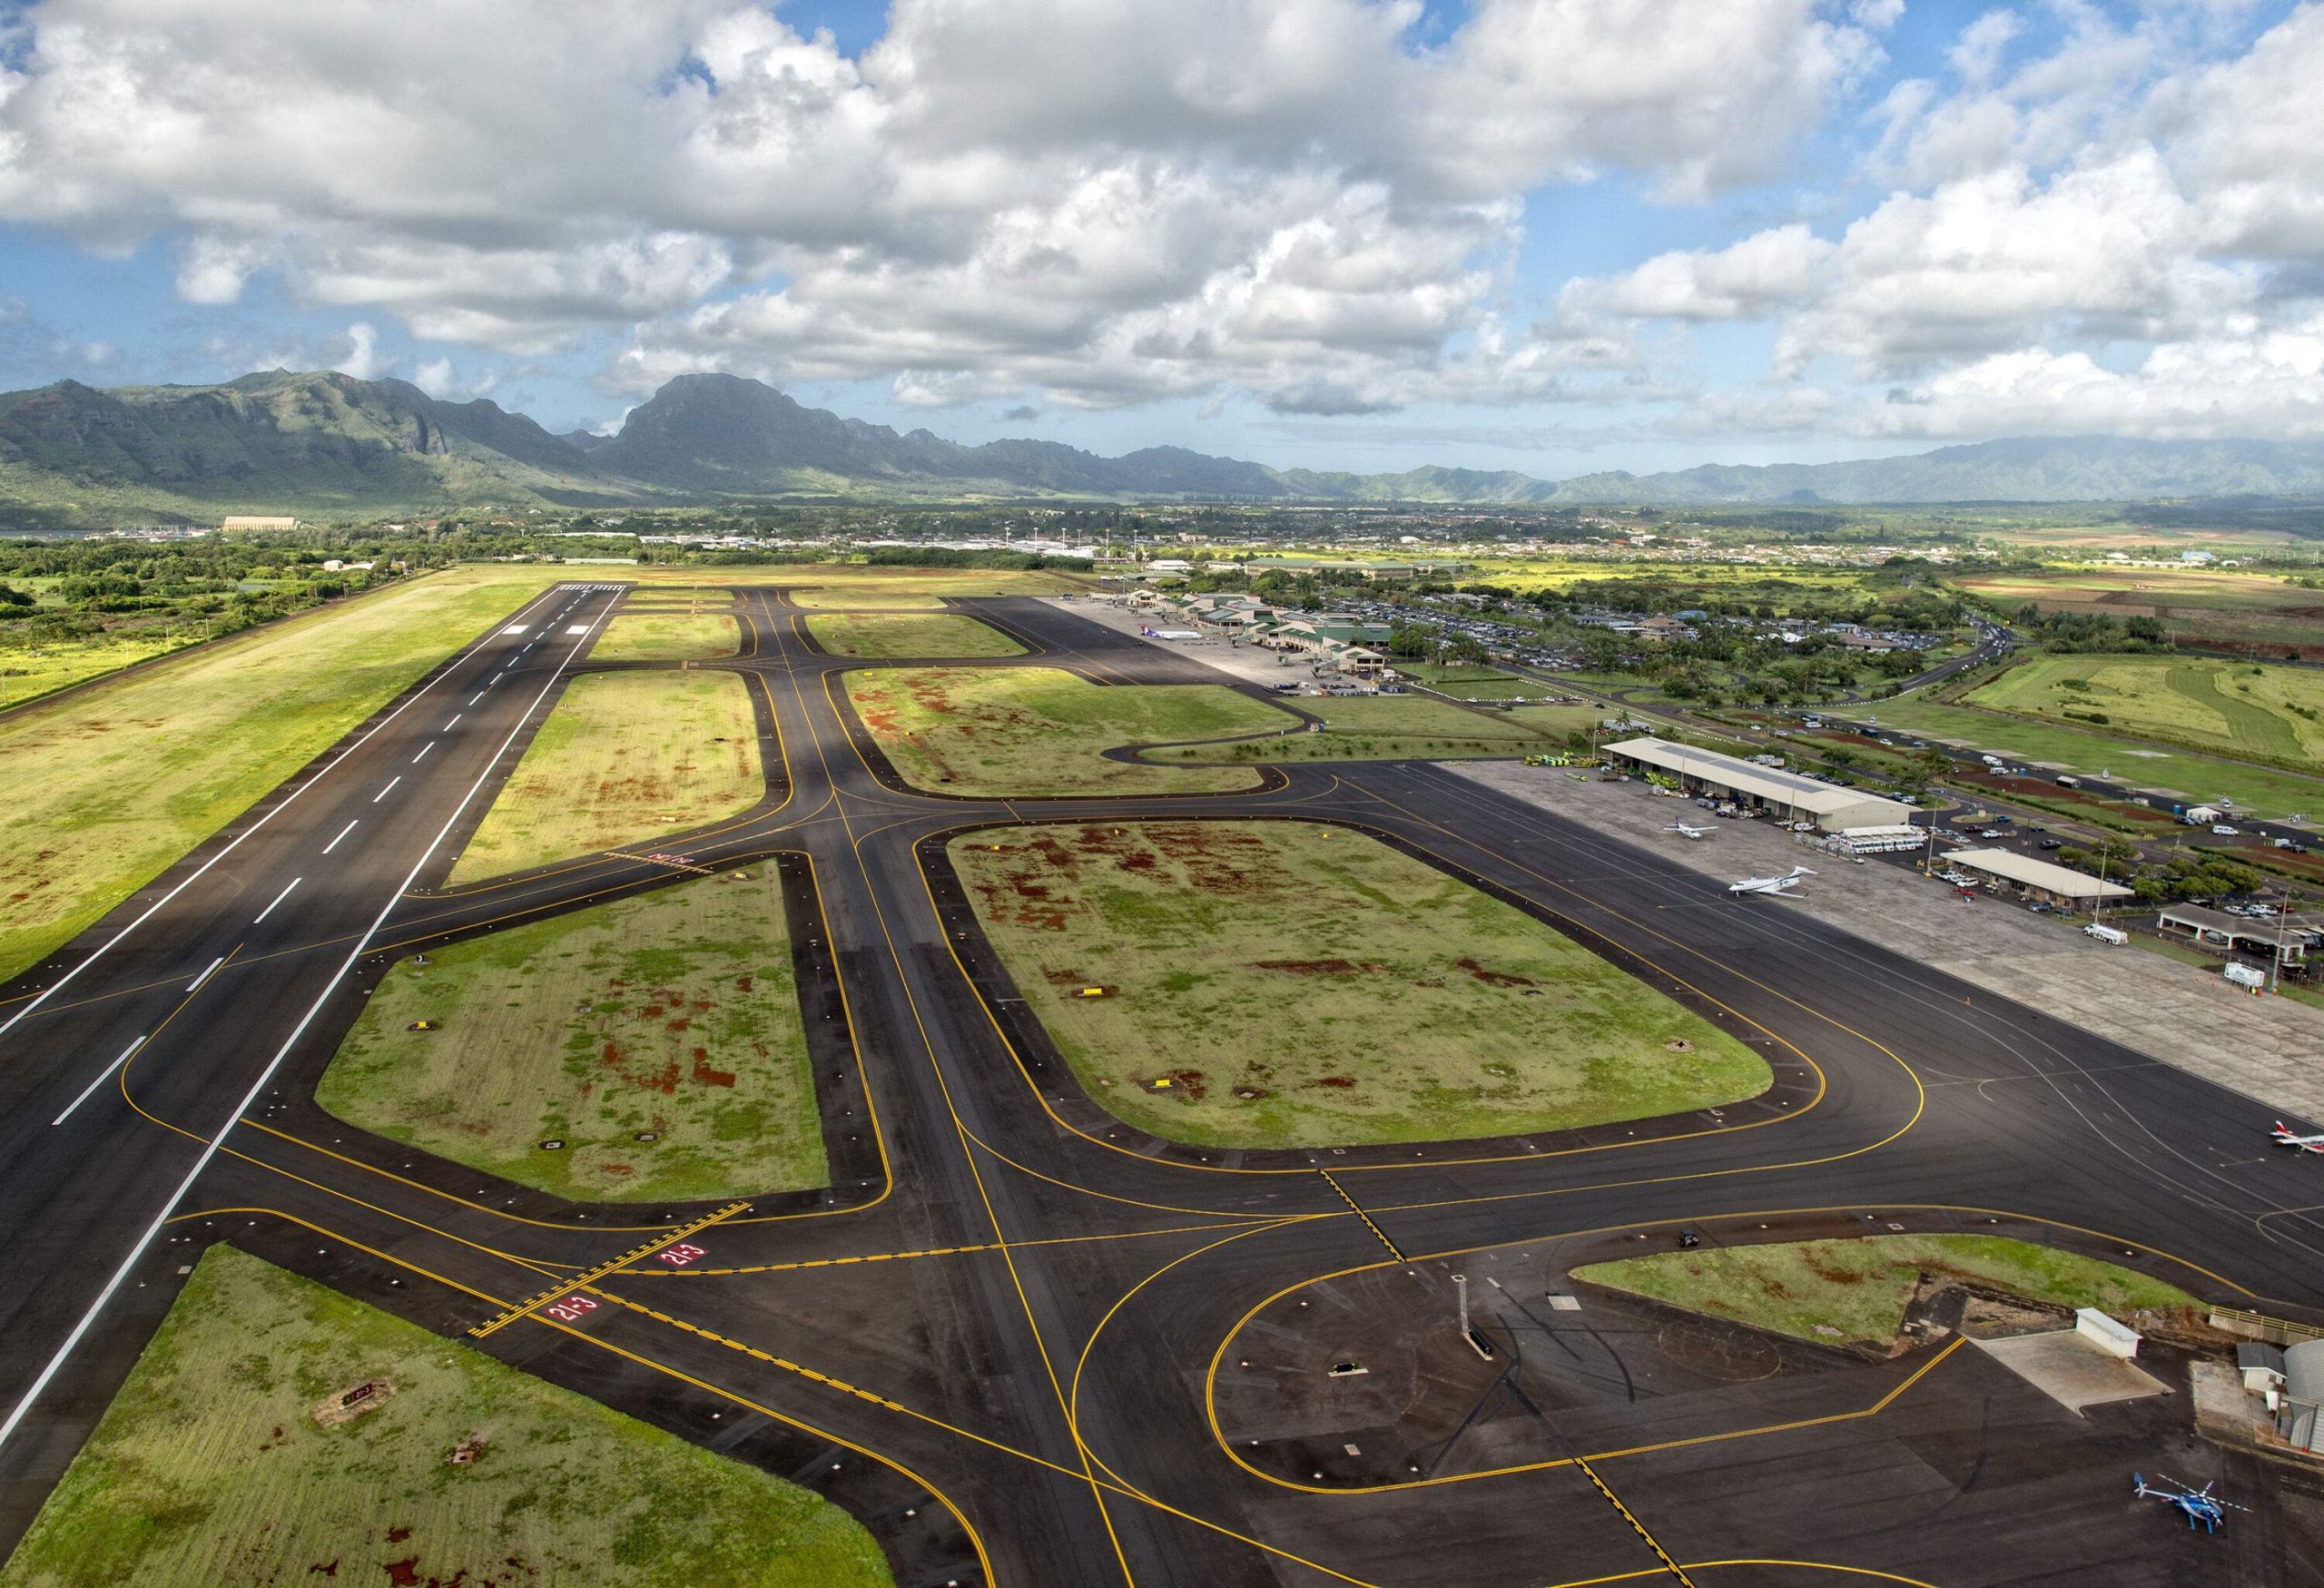 A tarmac dotted with green patches in between the runways and ramps.